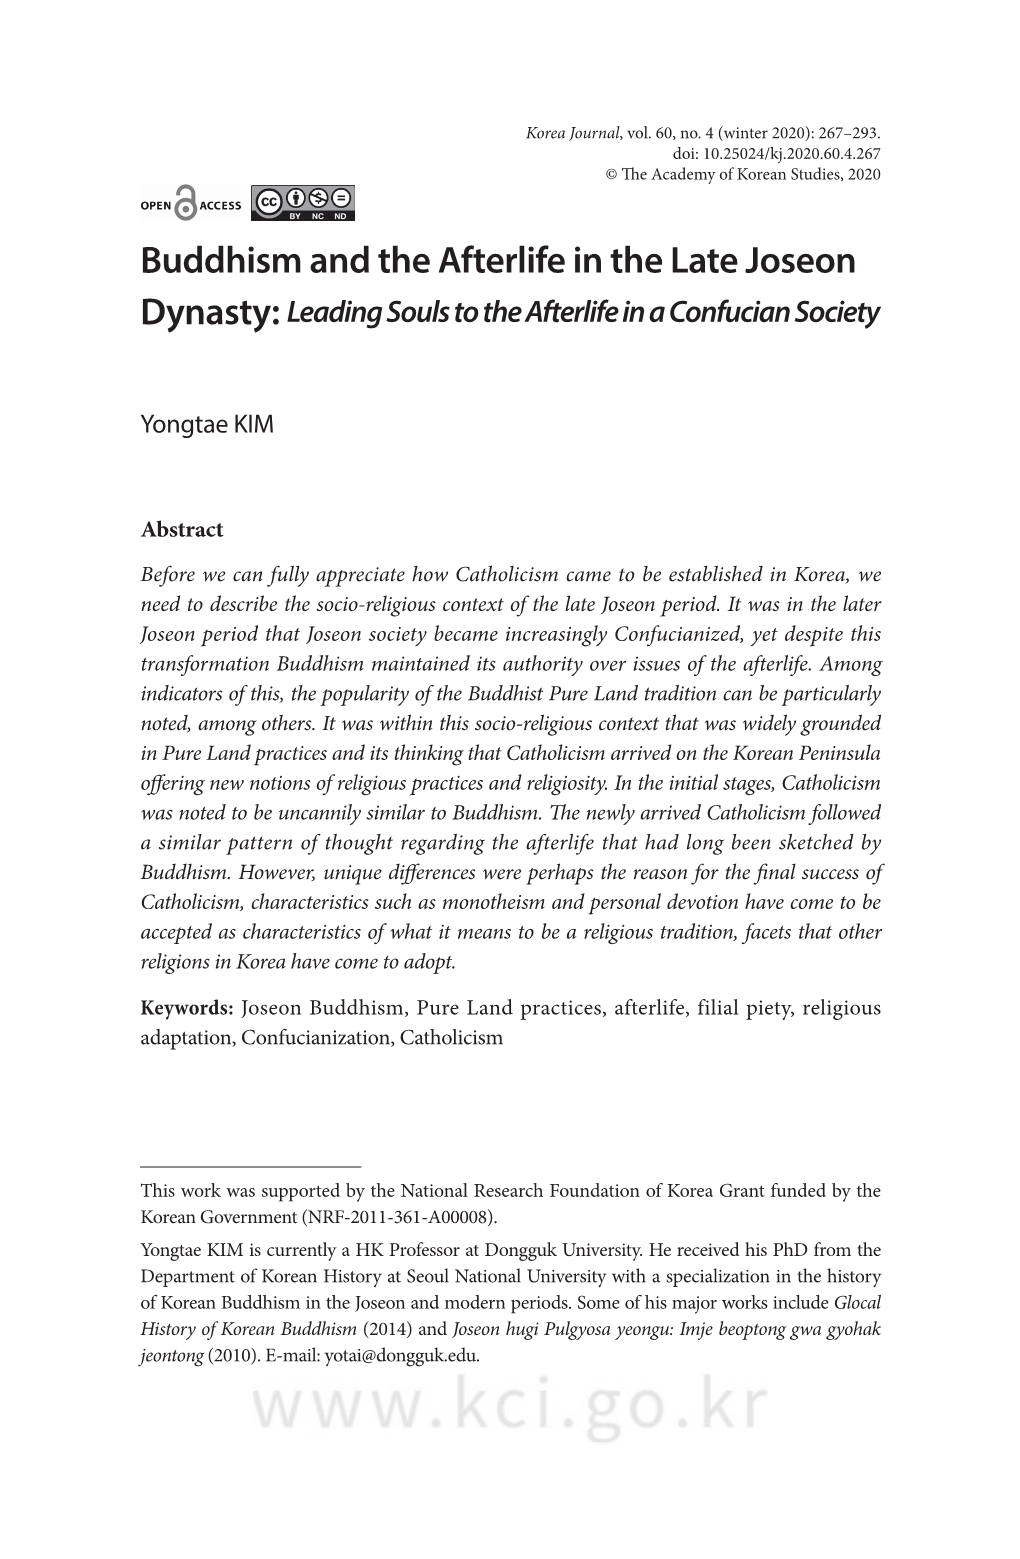 Buddhism and the Afterlife in the Late Joseon Dynasty: Leading Souls to the Afterlife in a Confucian Society